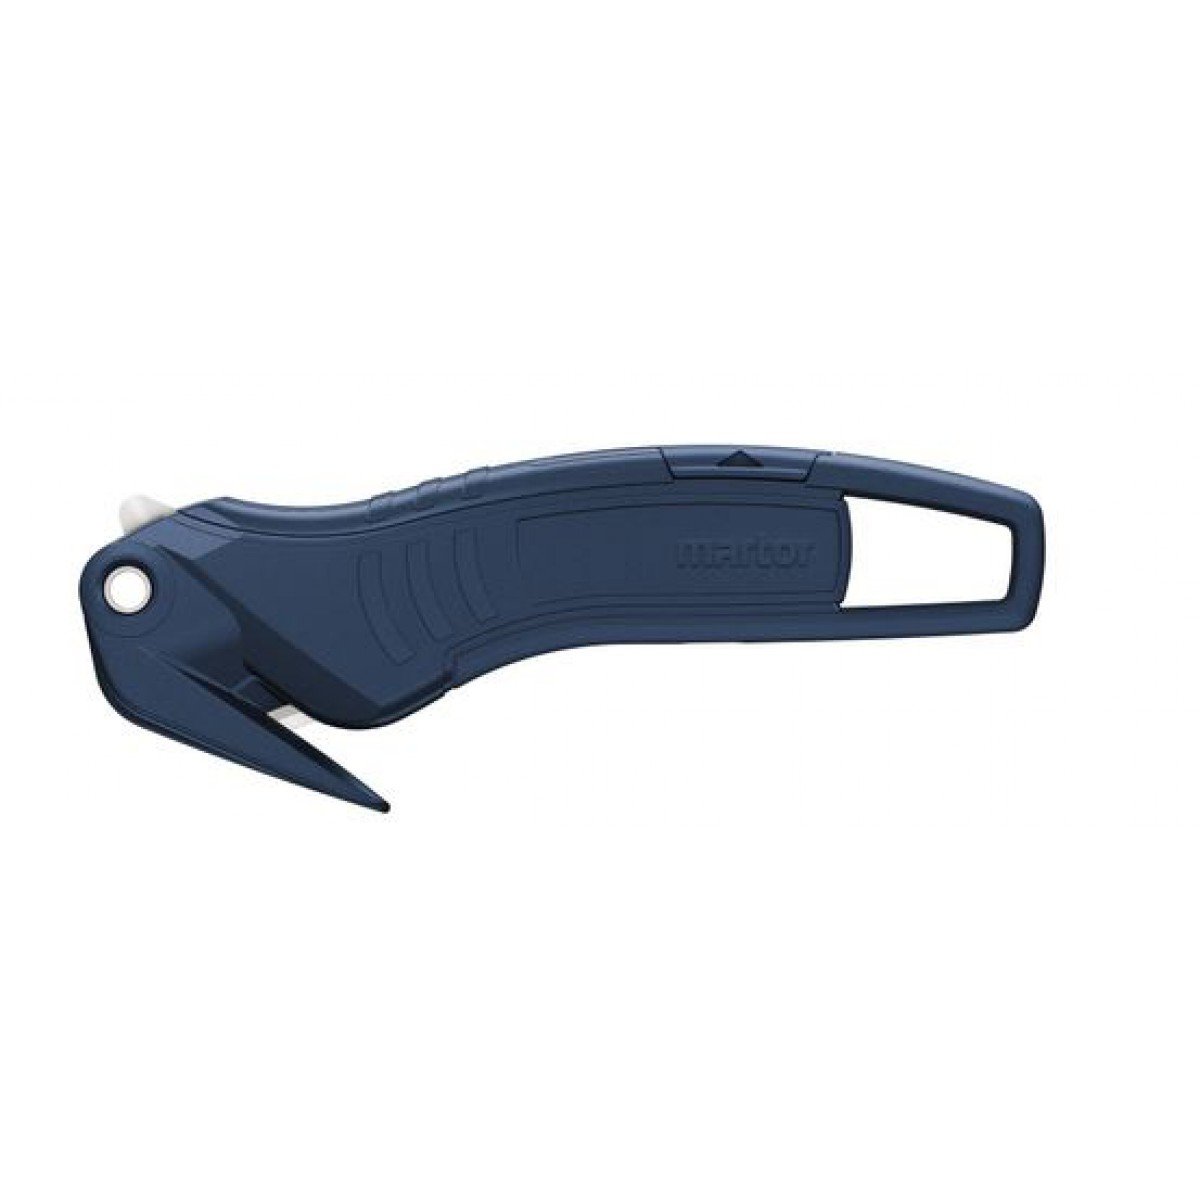 SECUMAX 320 MDP Metal Detectable Safety Knife